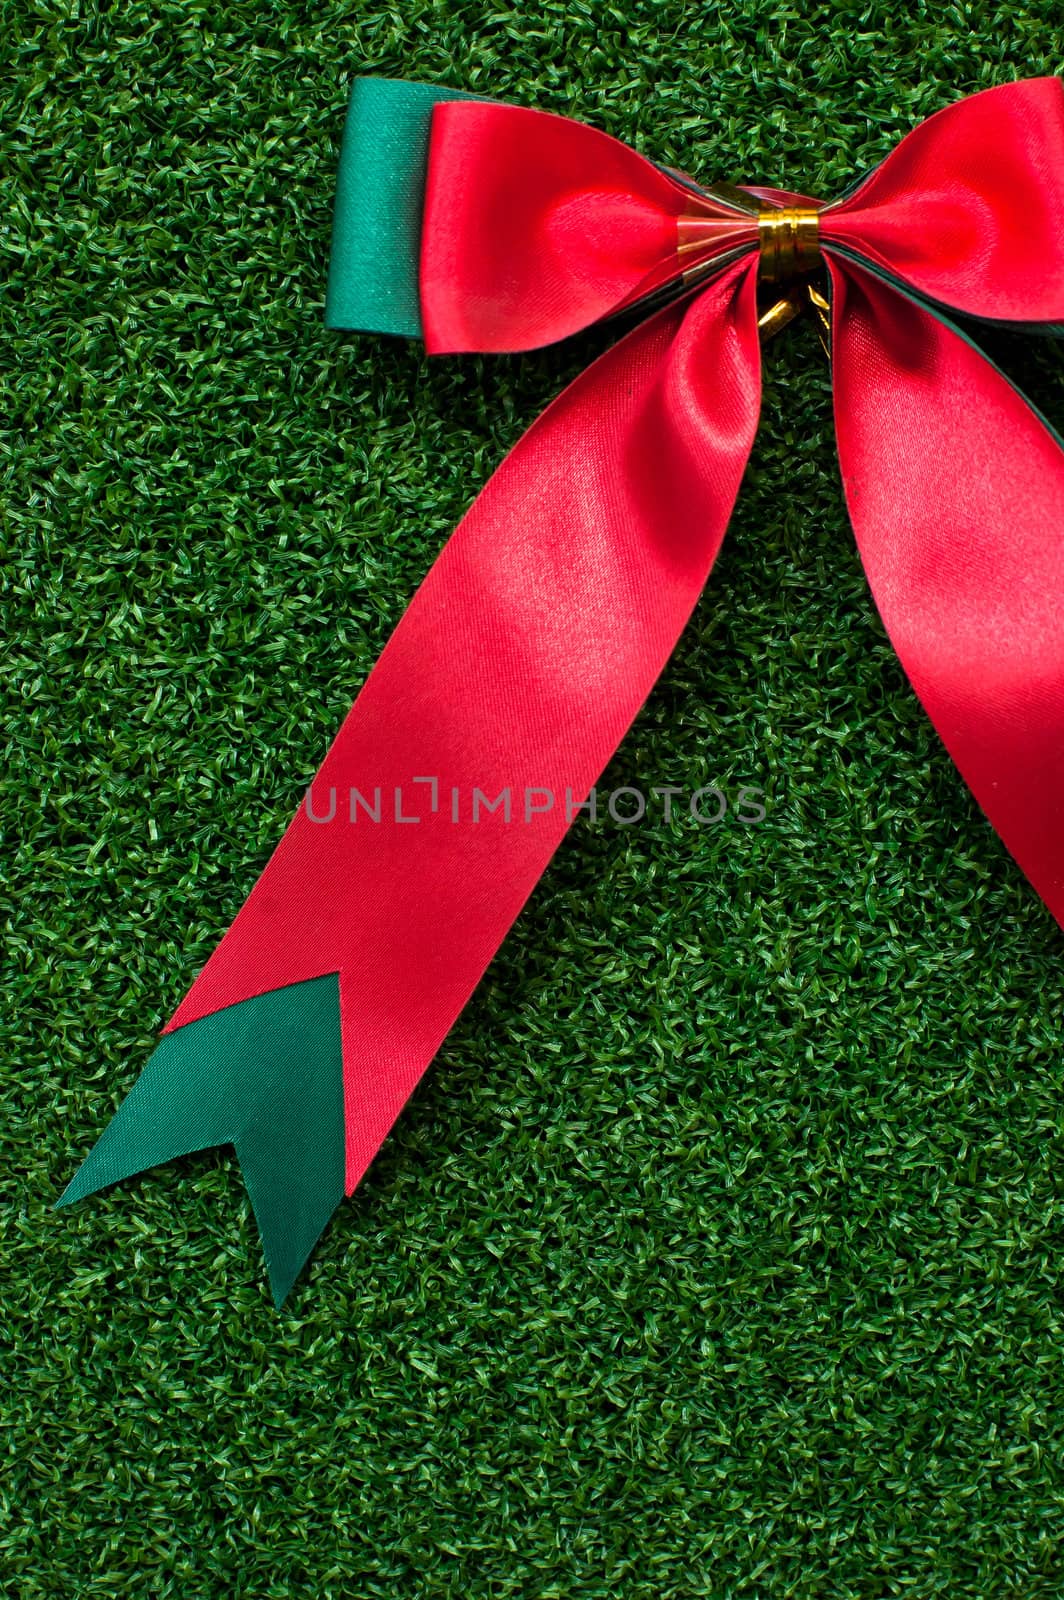 Red Bow on green grass by ponsulak